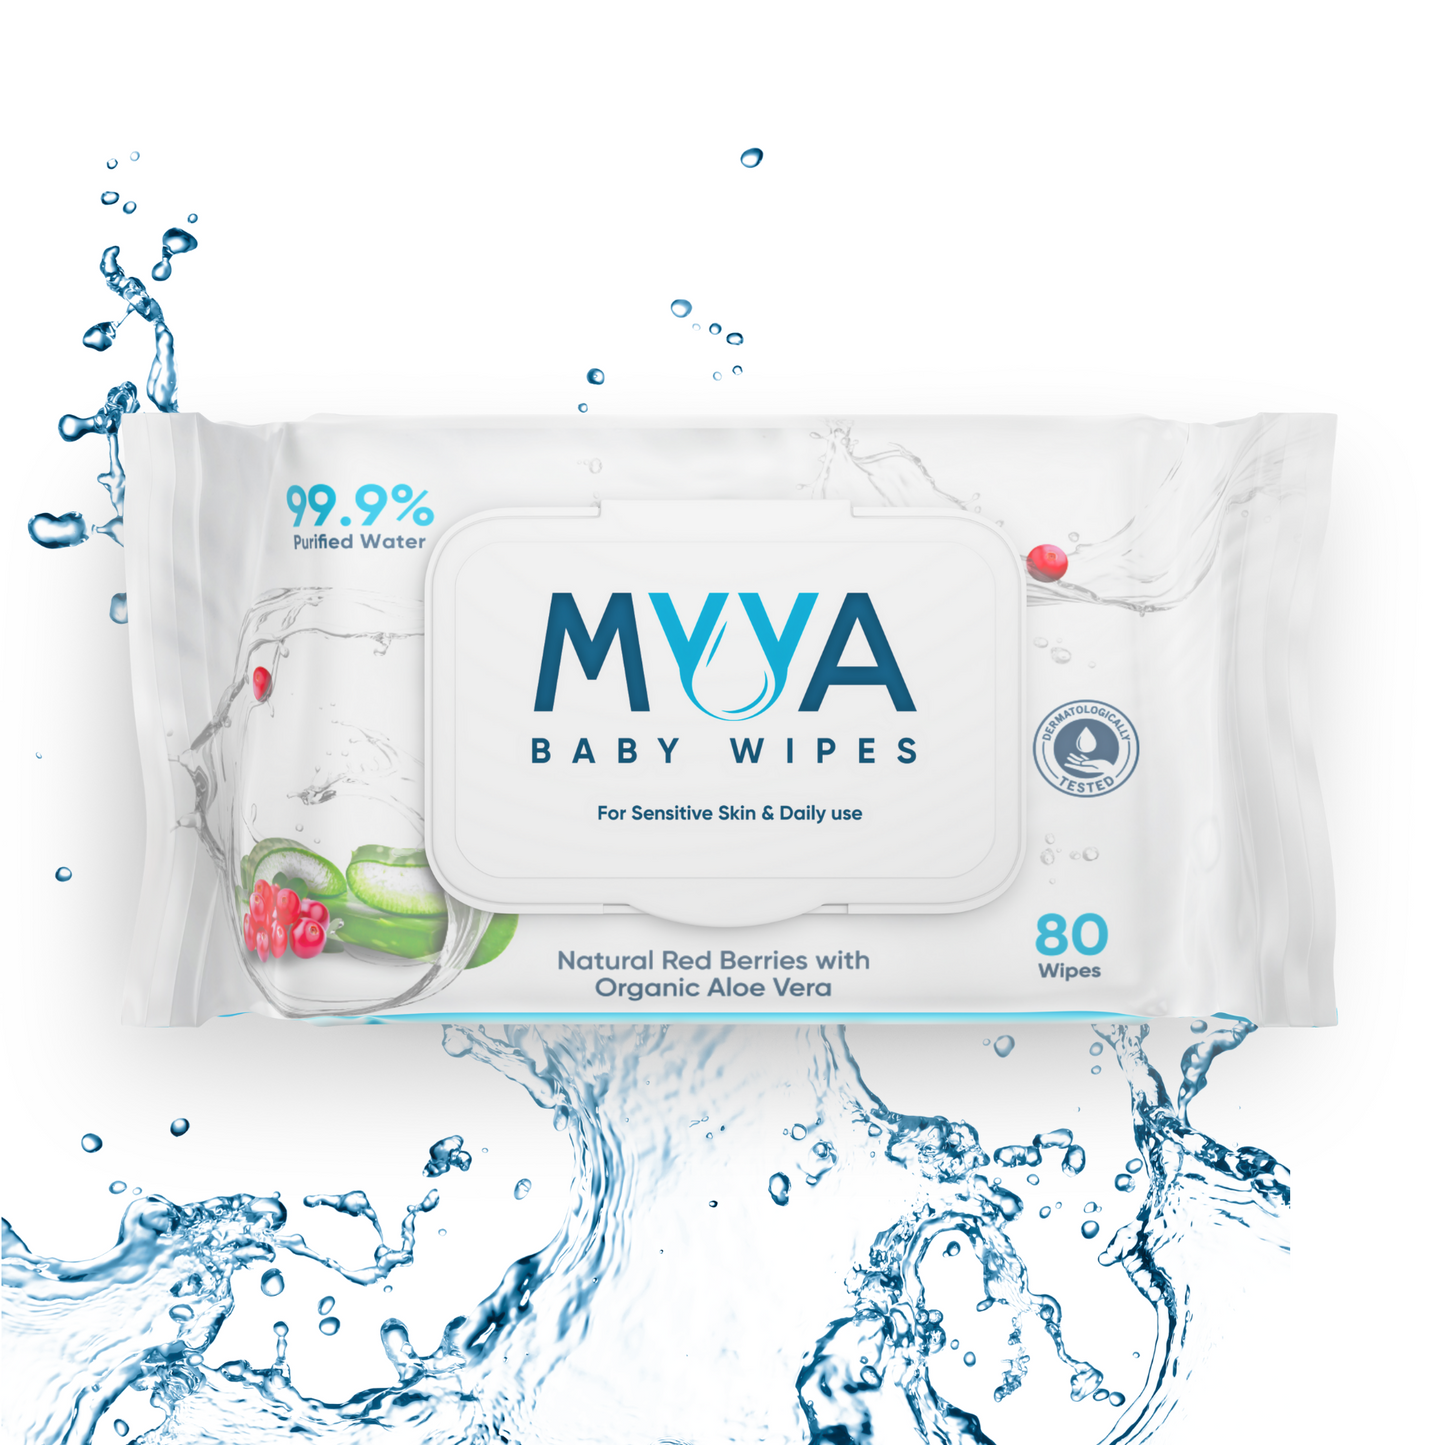 Myya Baby Wipes Made in Thailand and owned by Xpitrade